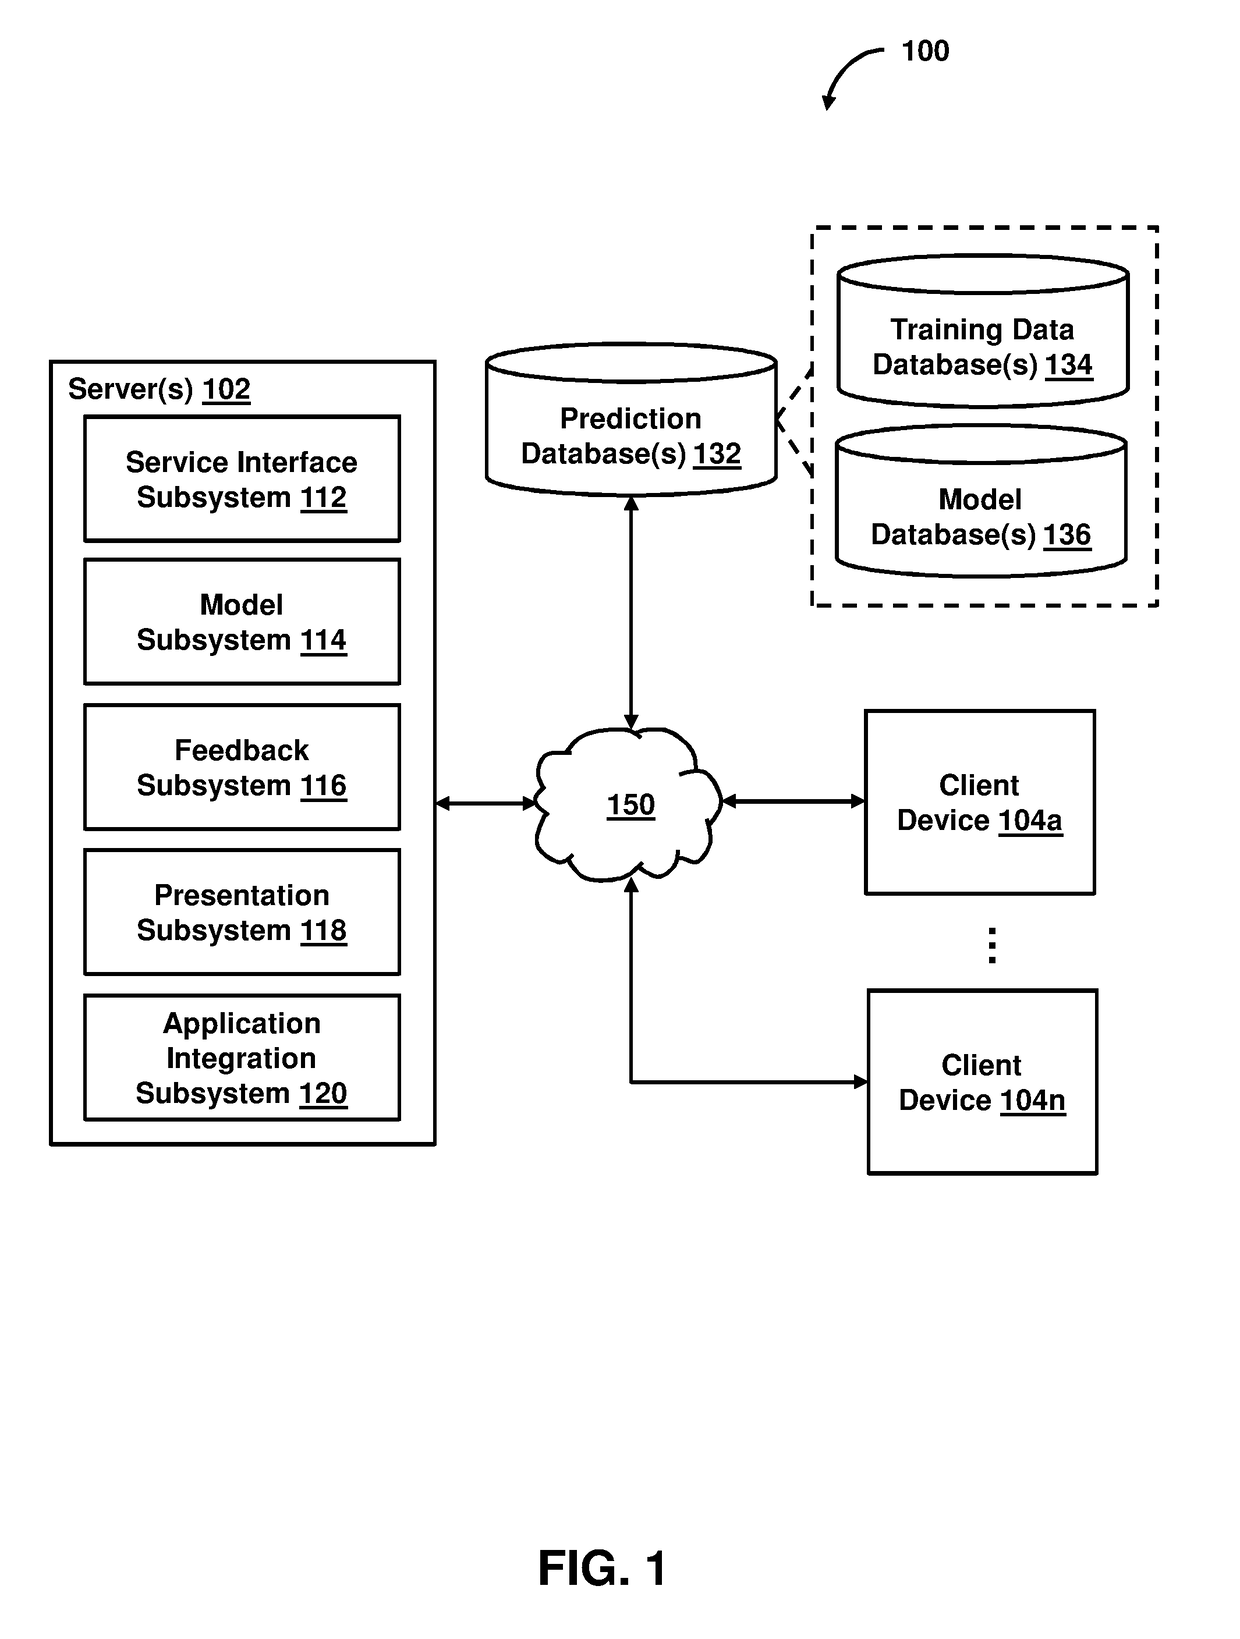 Artificial intelligence development via user-selectable/connectable model representations